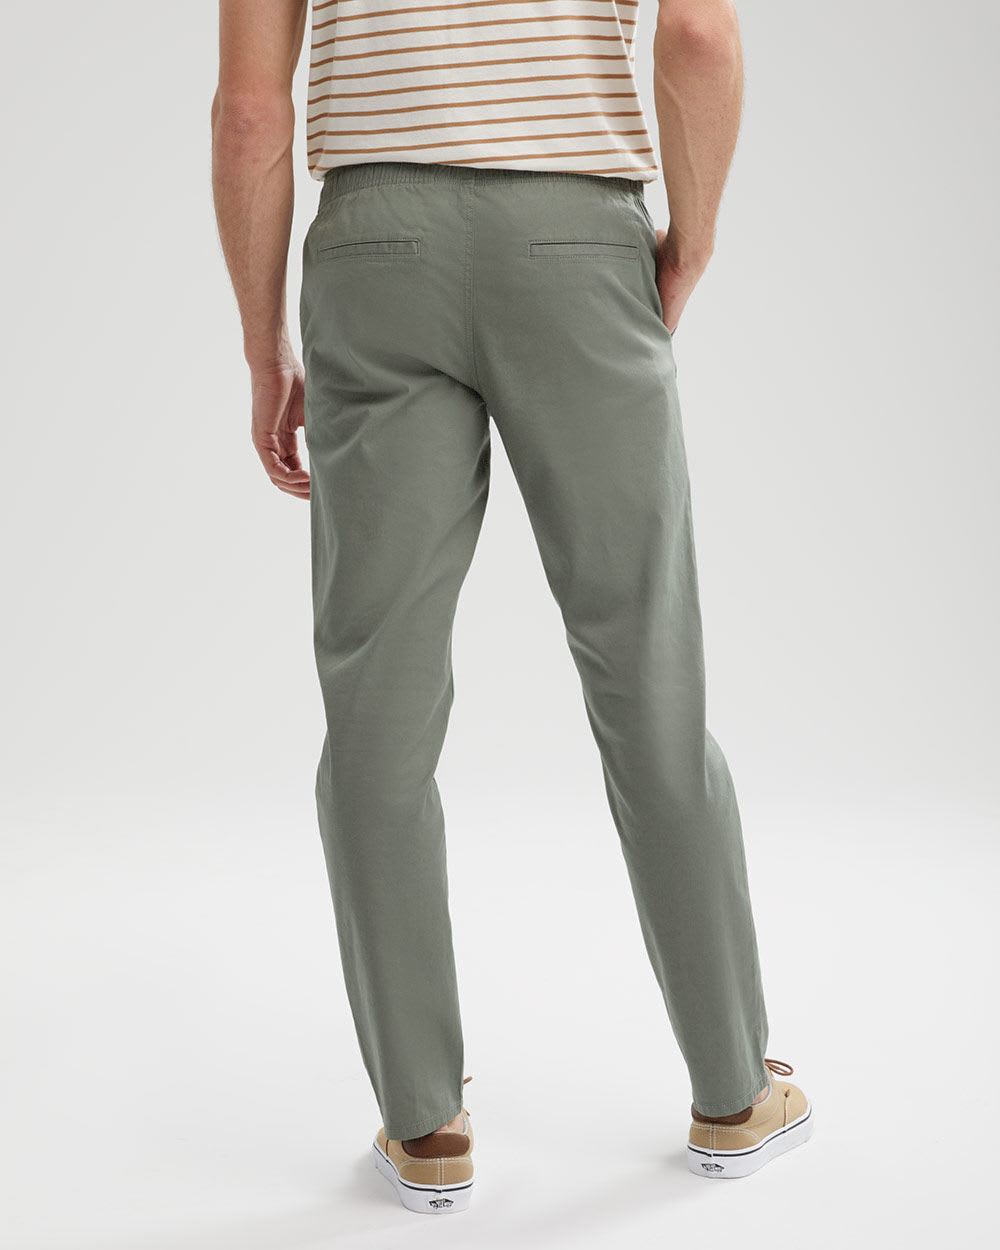 Casual Pant with Elastic Waistband and Drawstring - 32